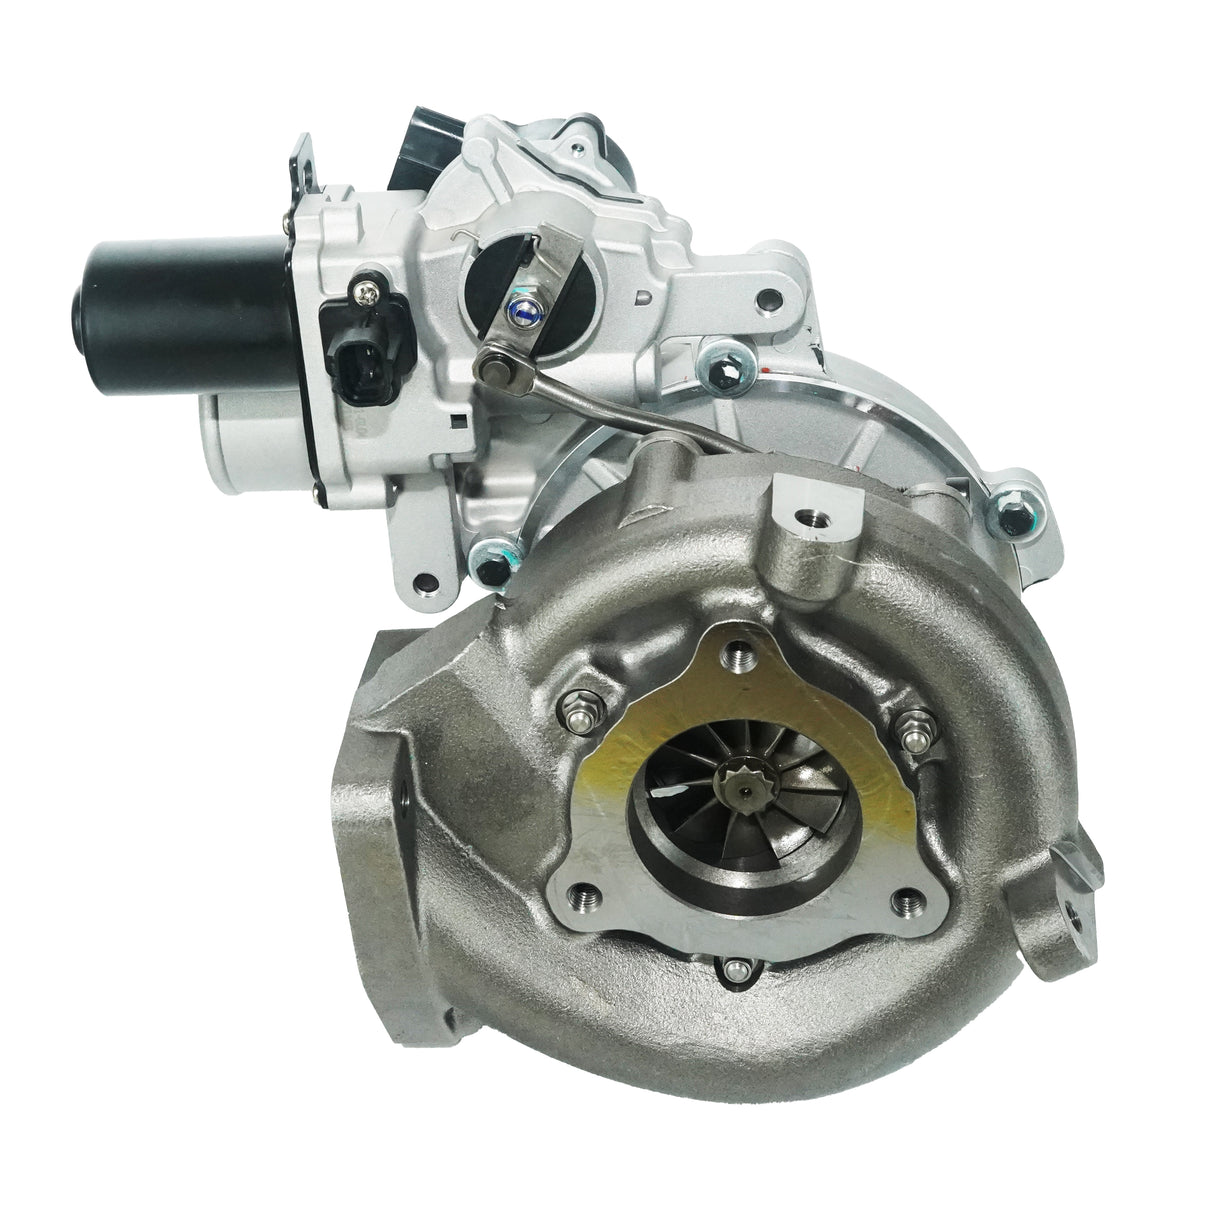 CCT Stage One Billet Turbo charger To Suit Toyota Hilux KUN26 1KD-FTV 3.0L 2005-2015